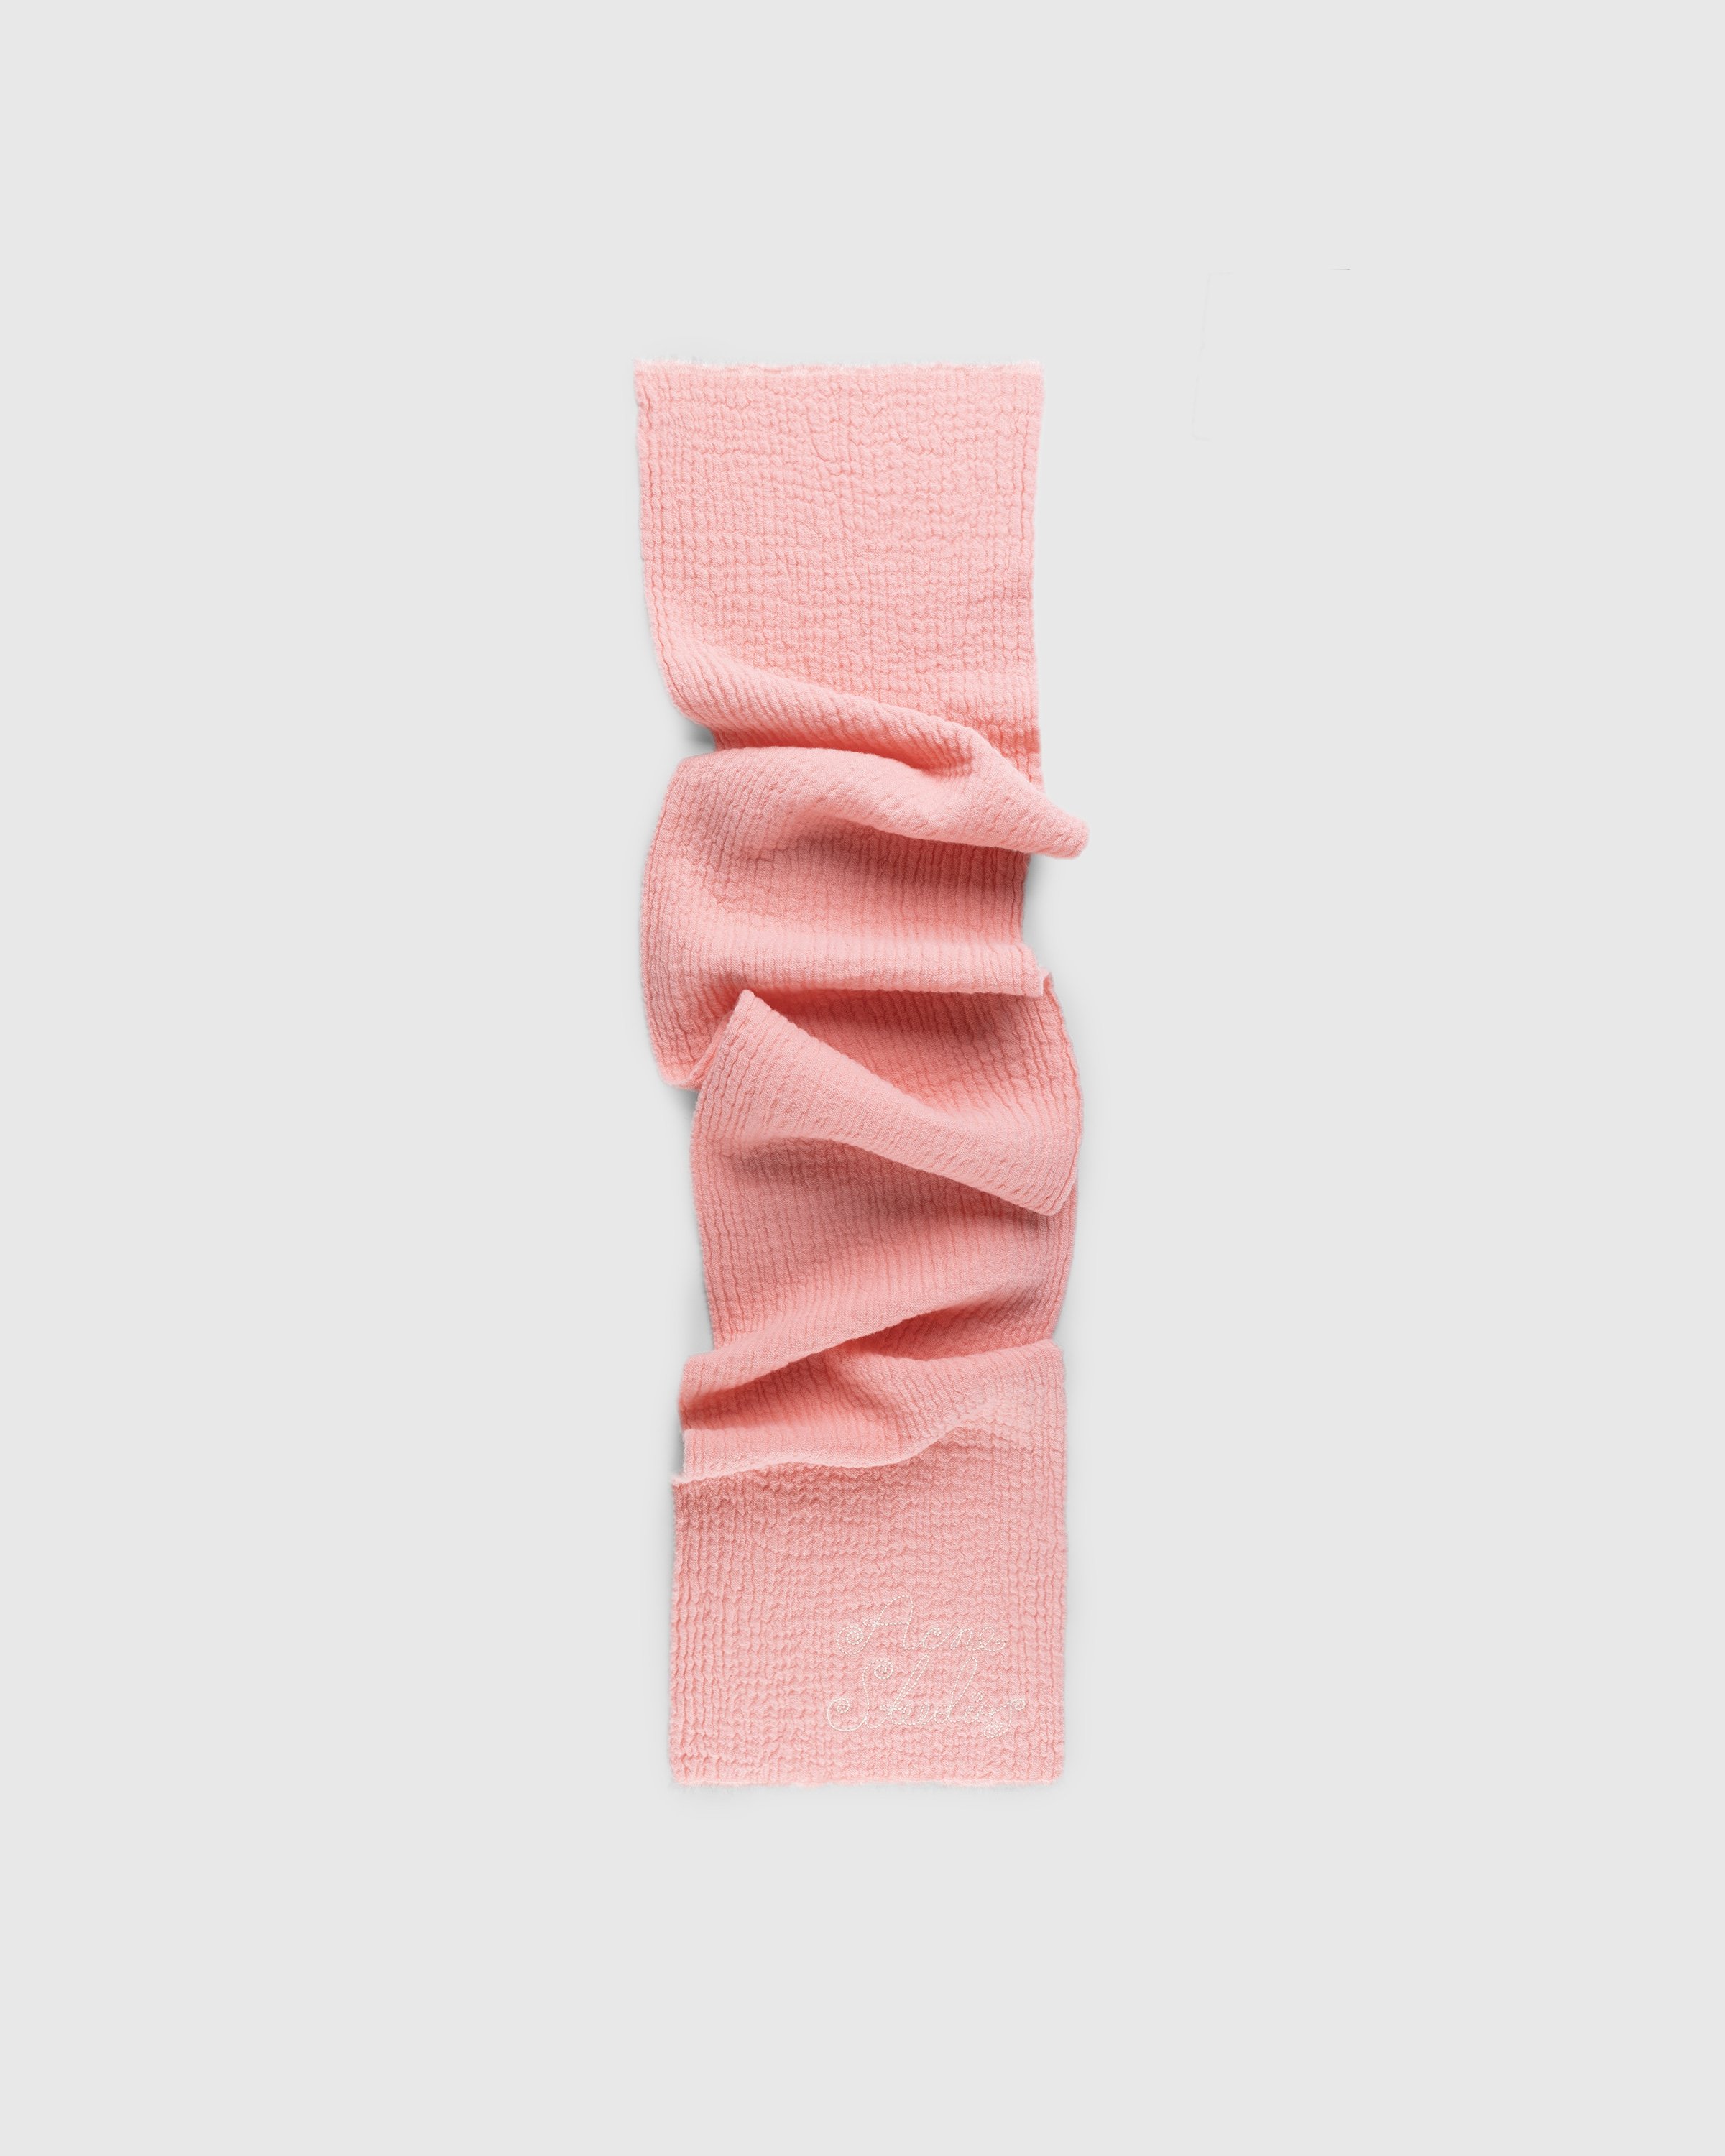 Acne Studios - Logo Scarf Pink - Accessories - Pink - Image 1